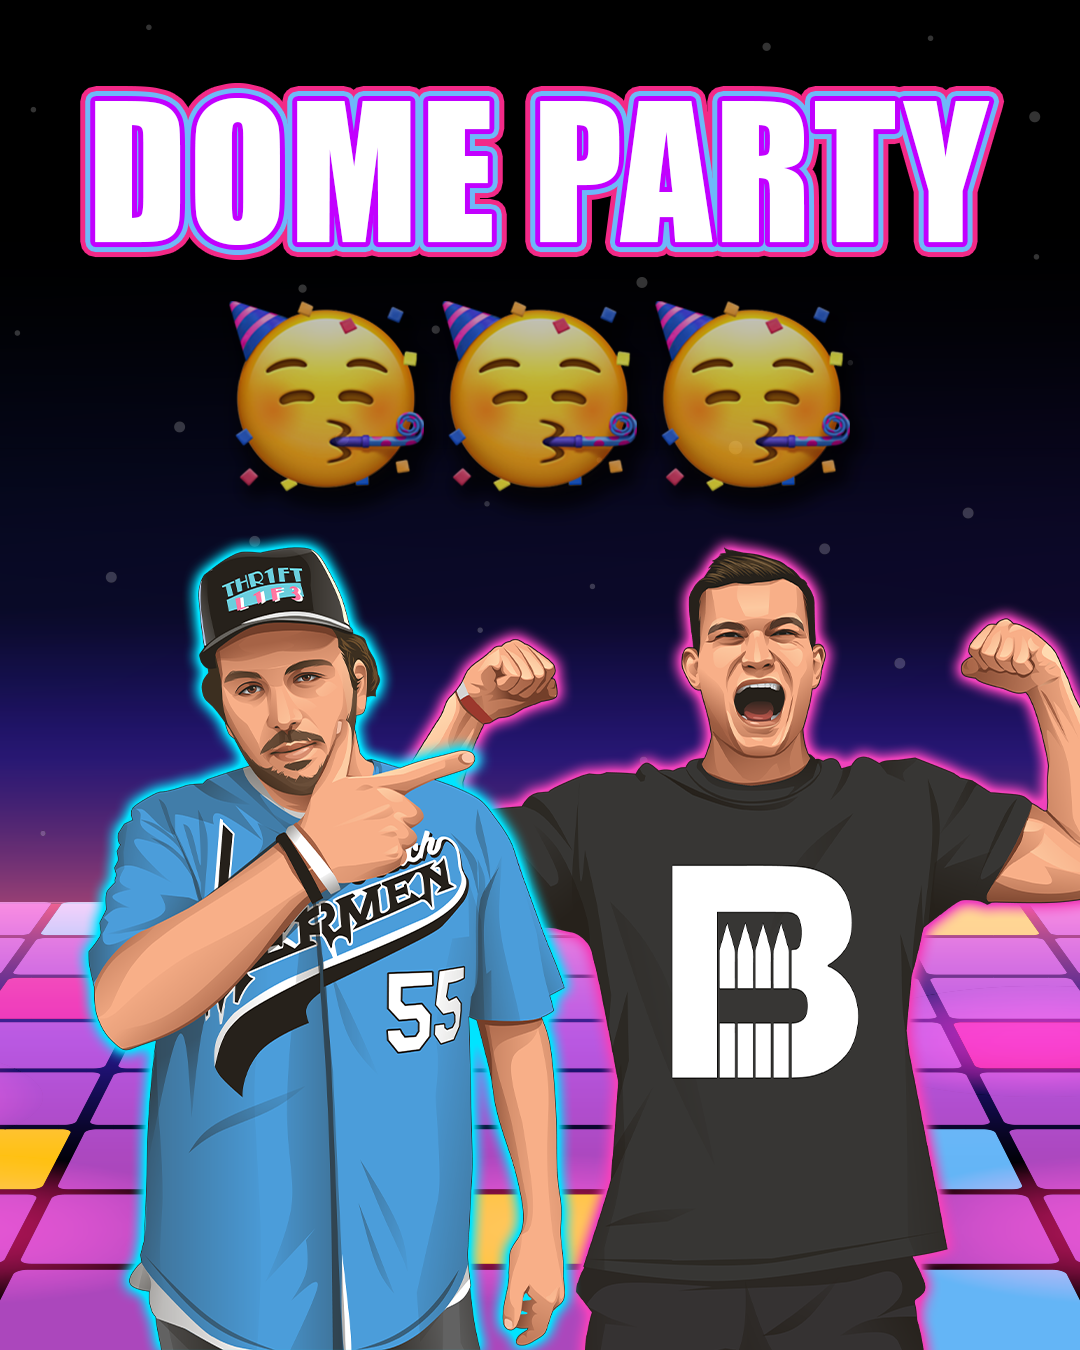 🥳 DOME PARTY 🥳